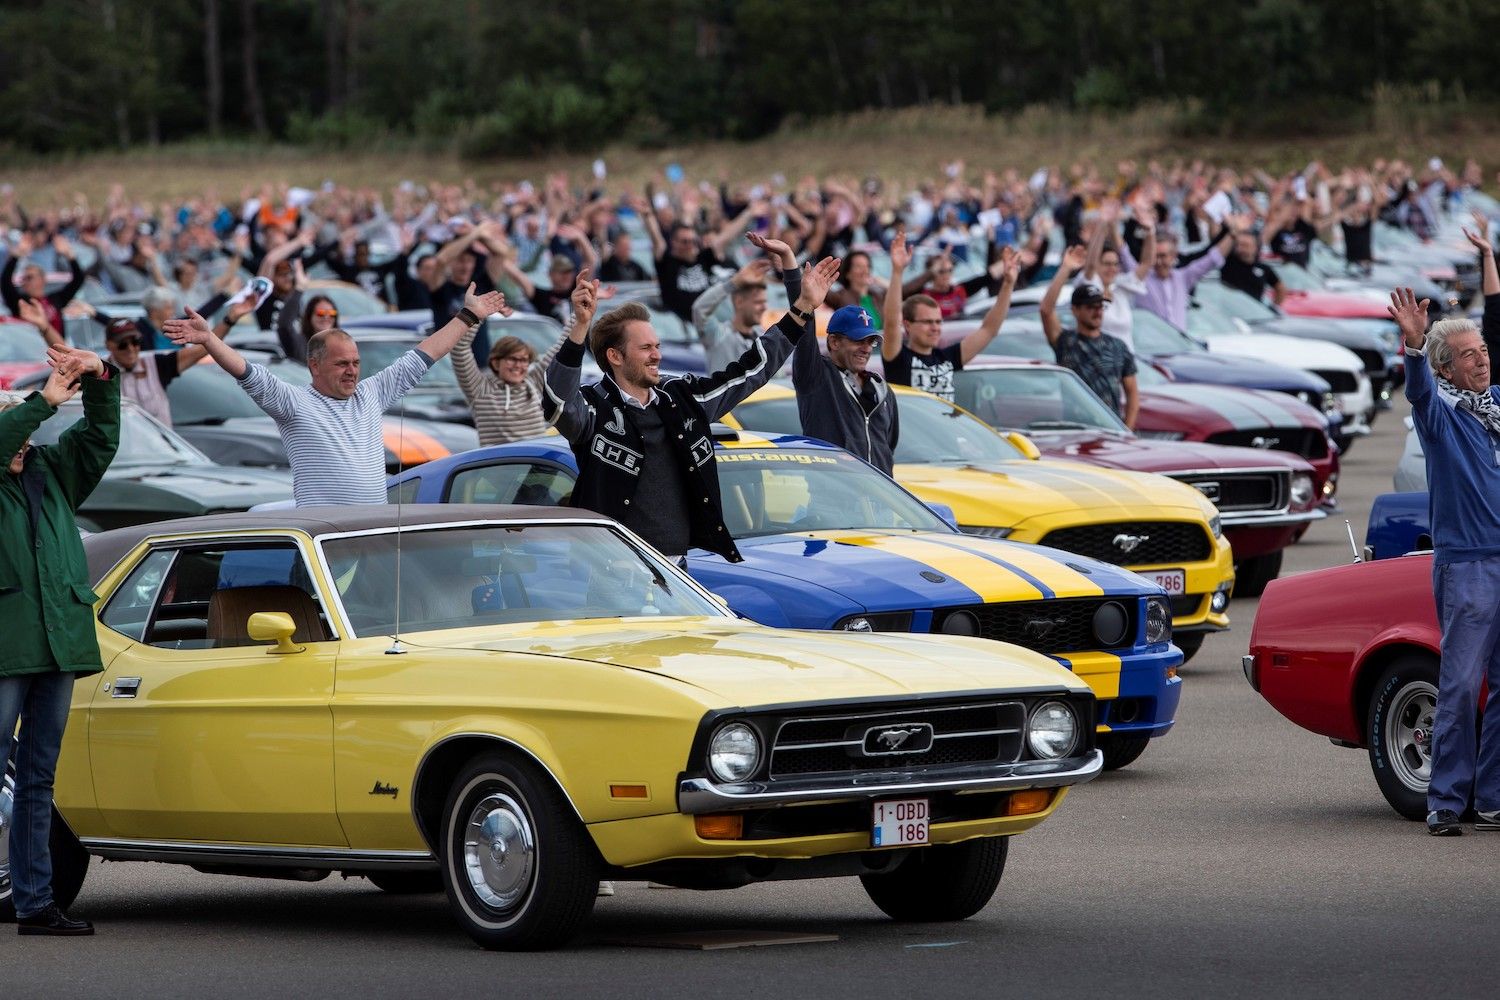 A record 960 people who own Ford Mustangs in a meetup